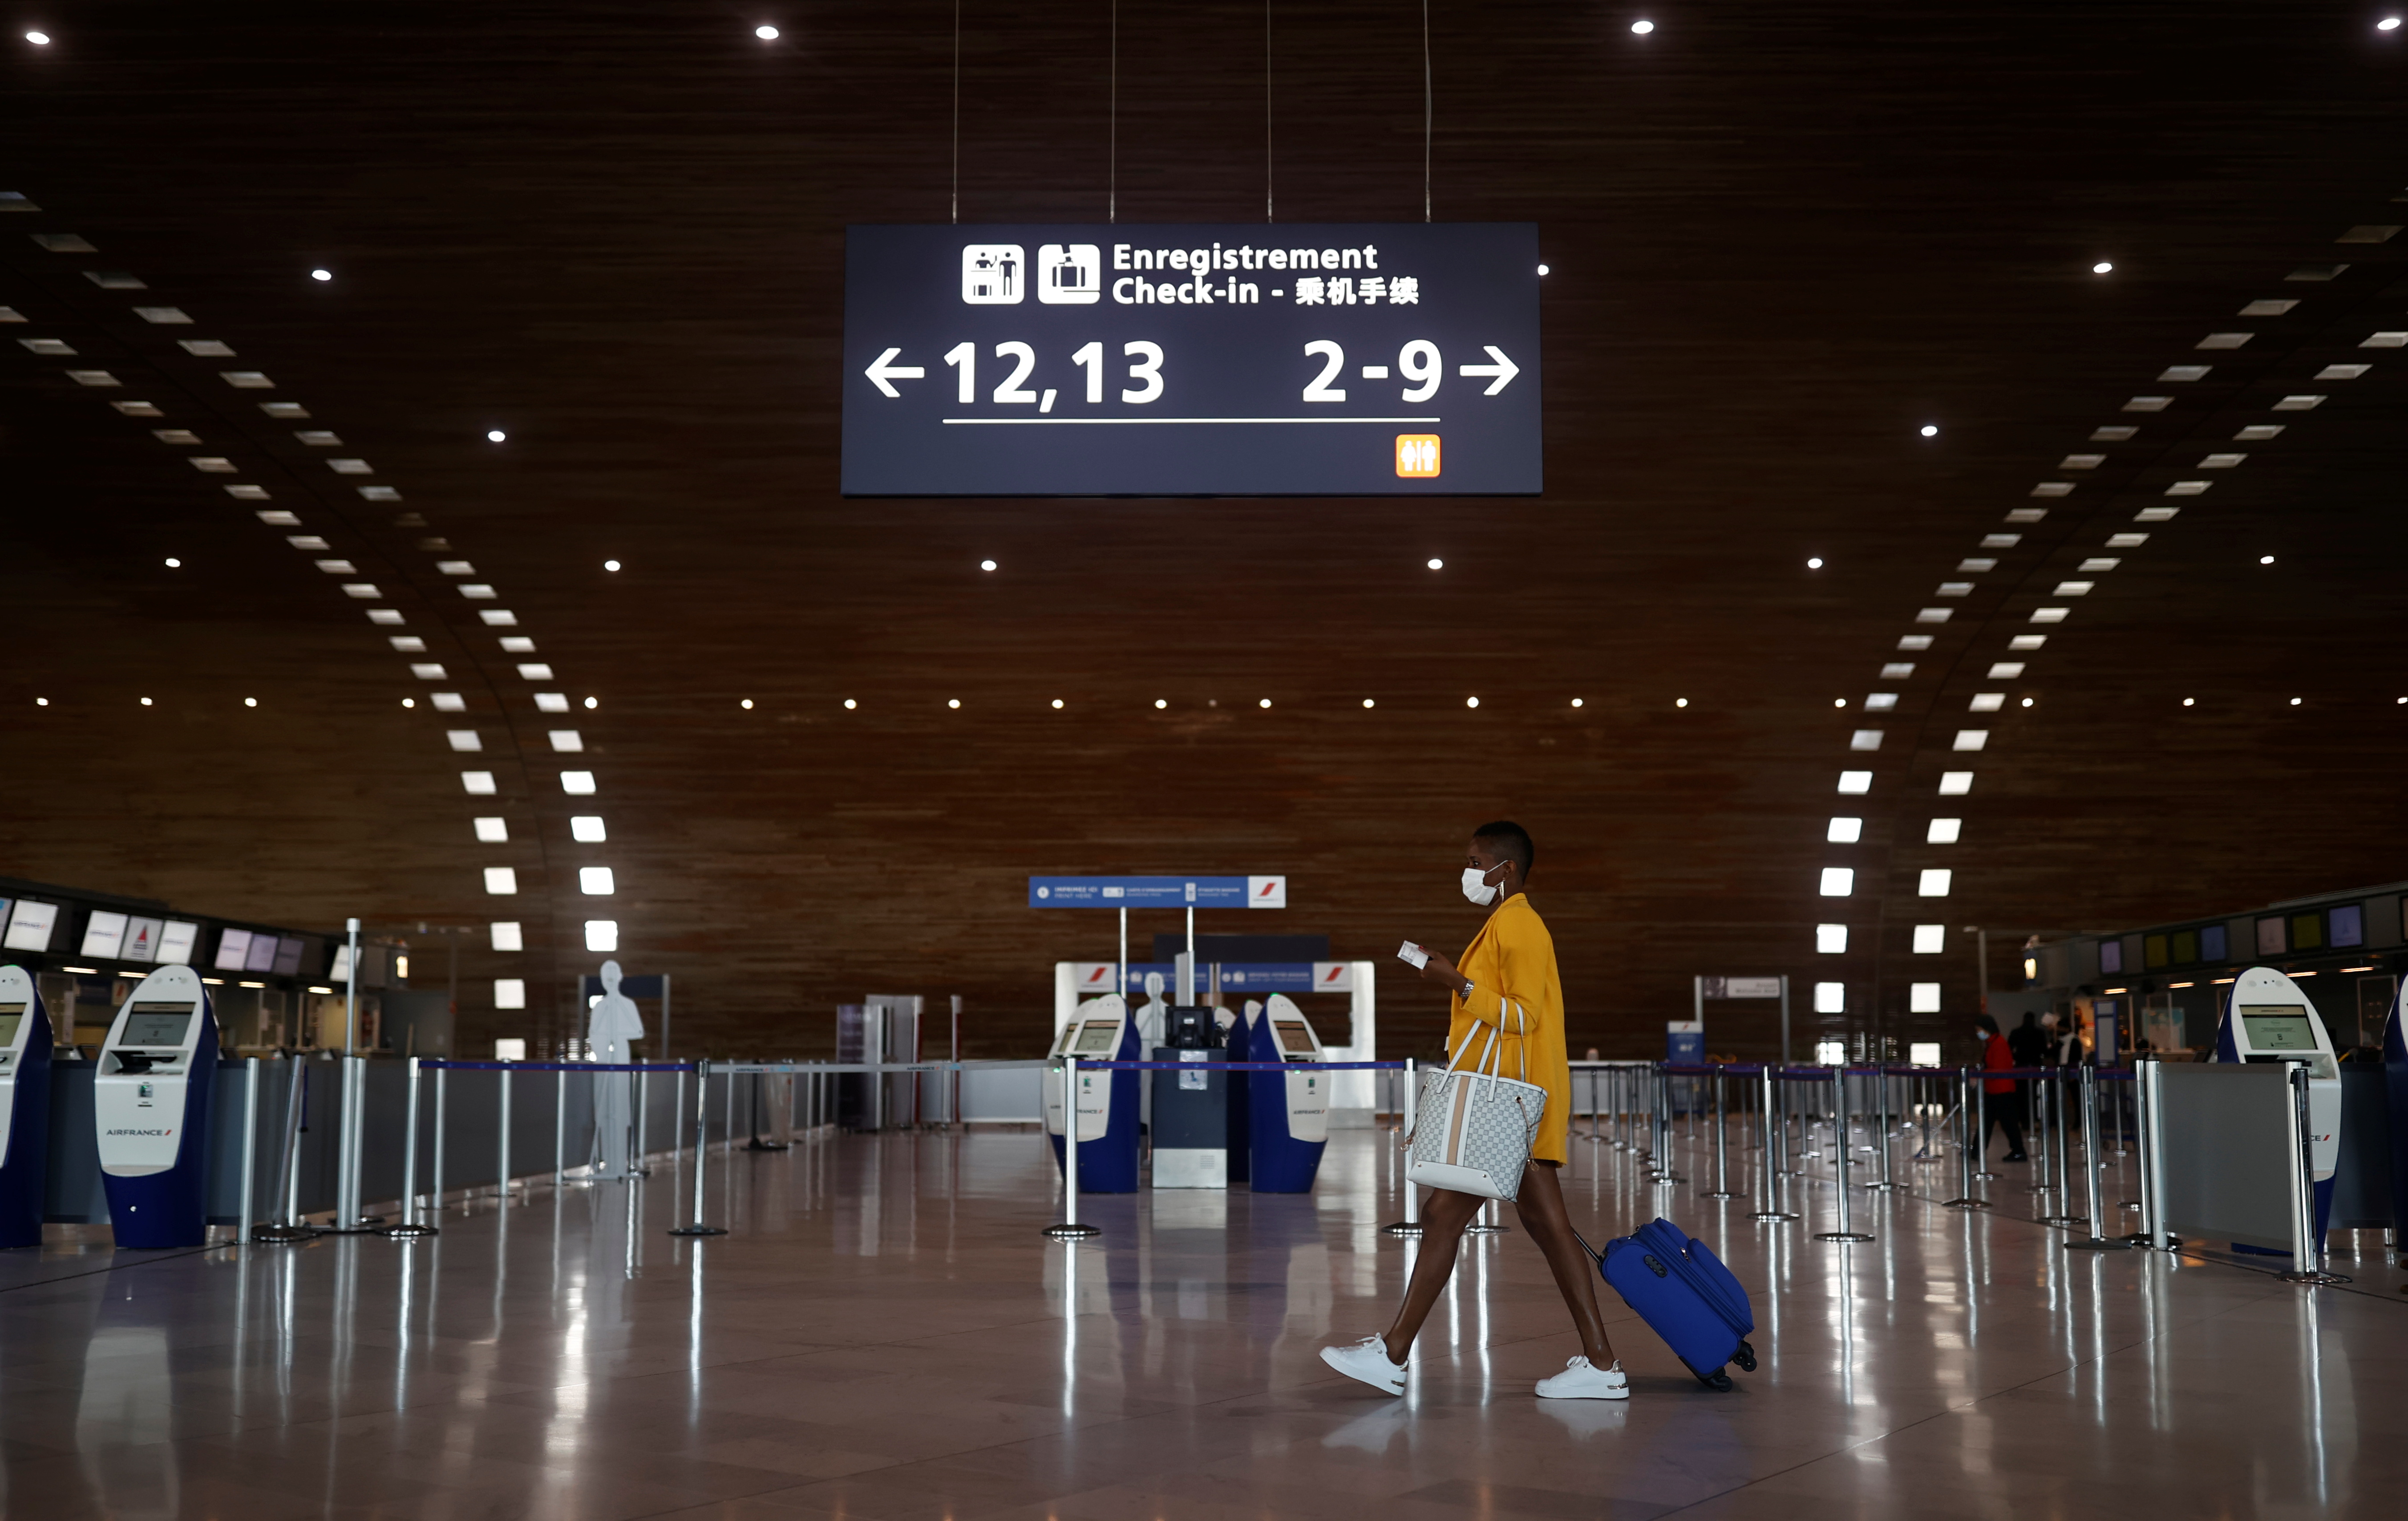 A woman makes her way in the departures area of the Terminal 2E at Charles-de-Gaulle airport in Roissy